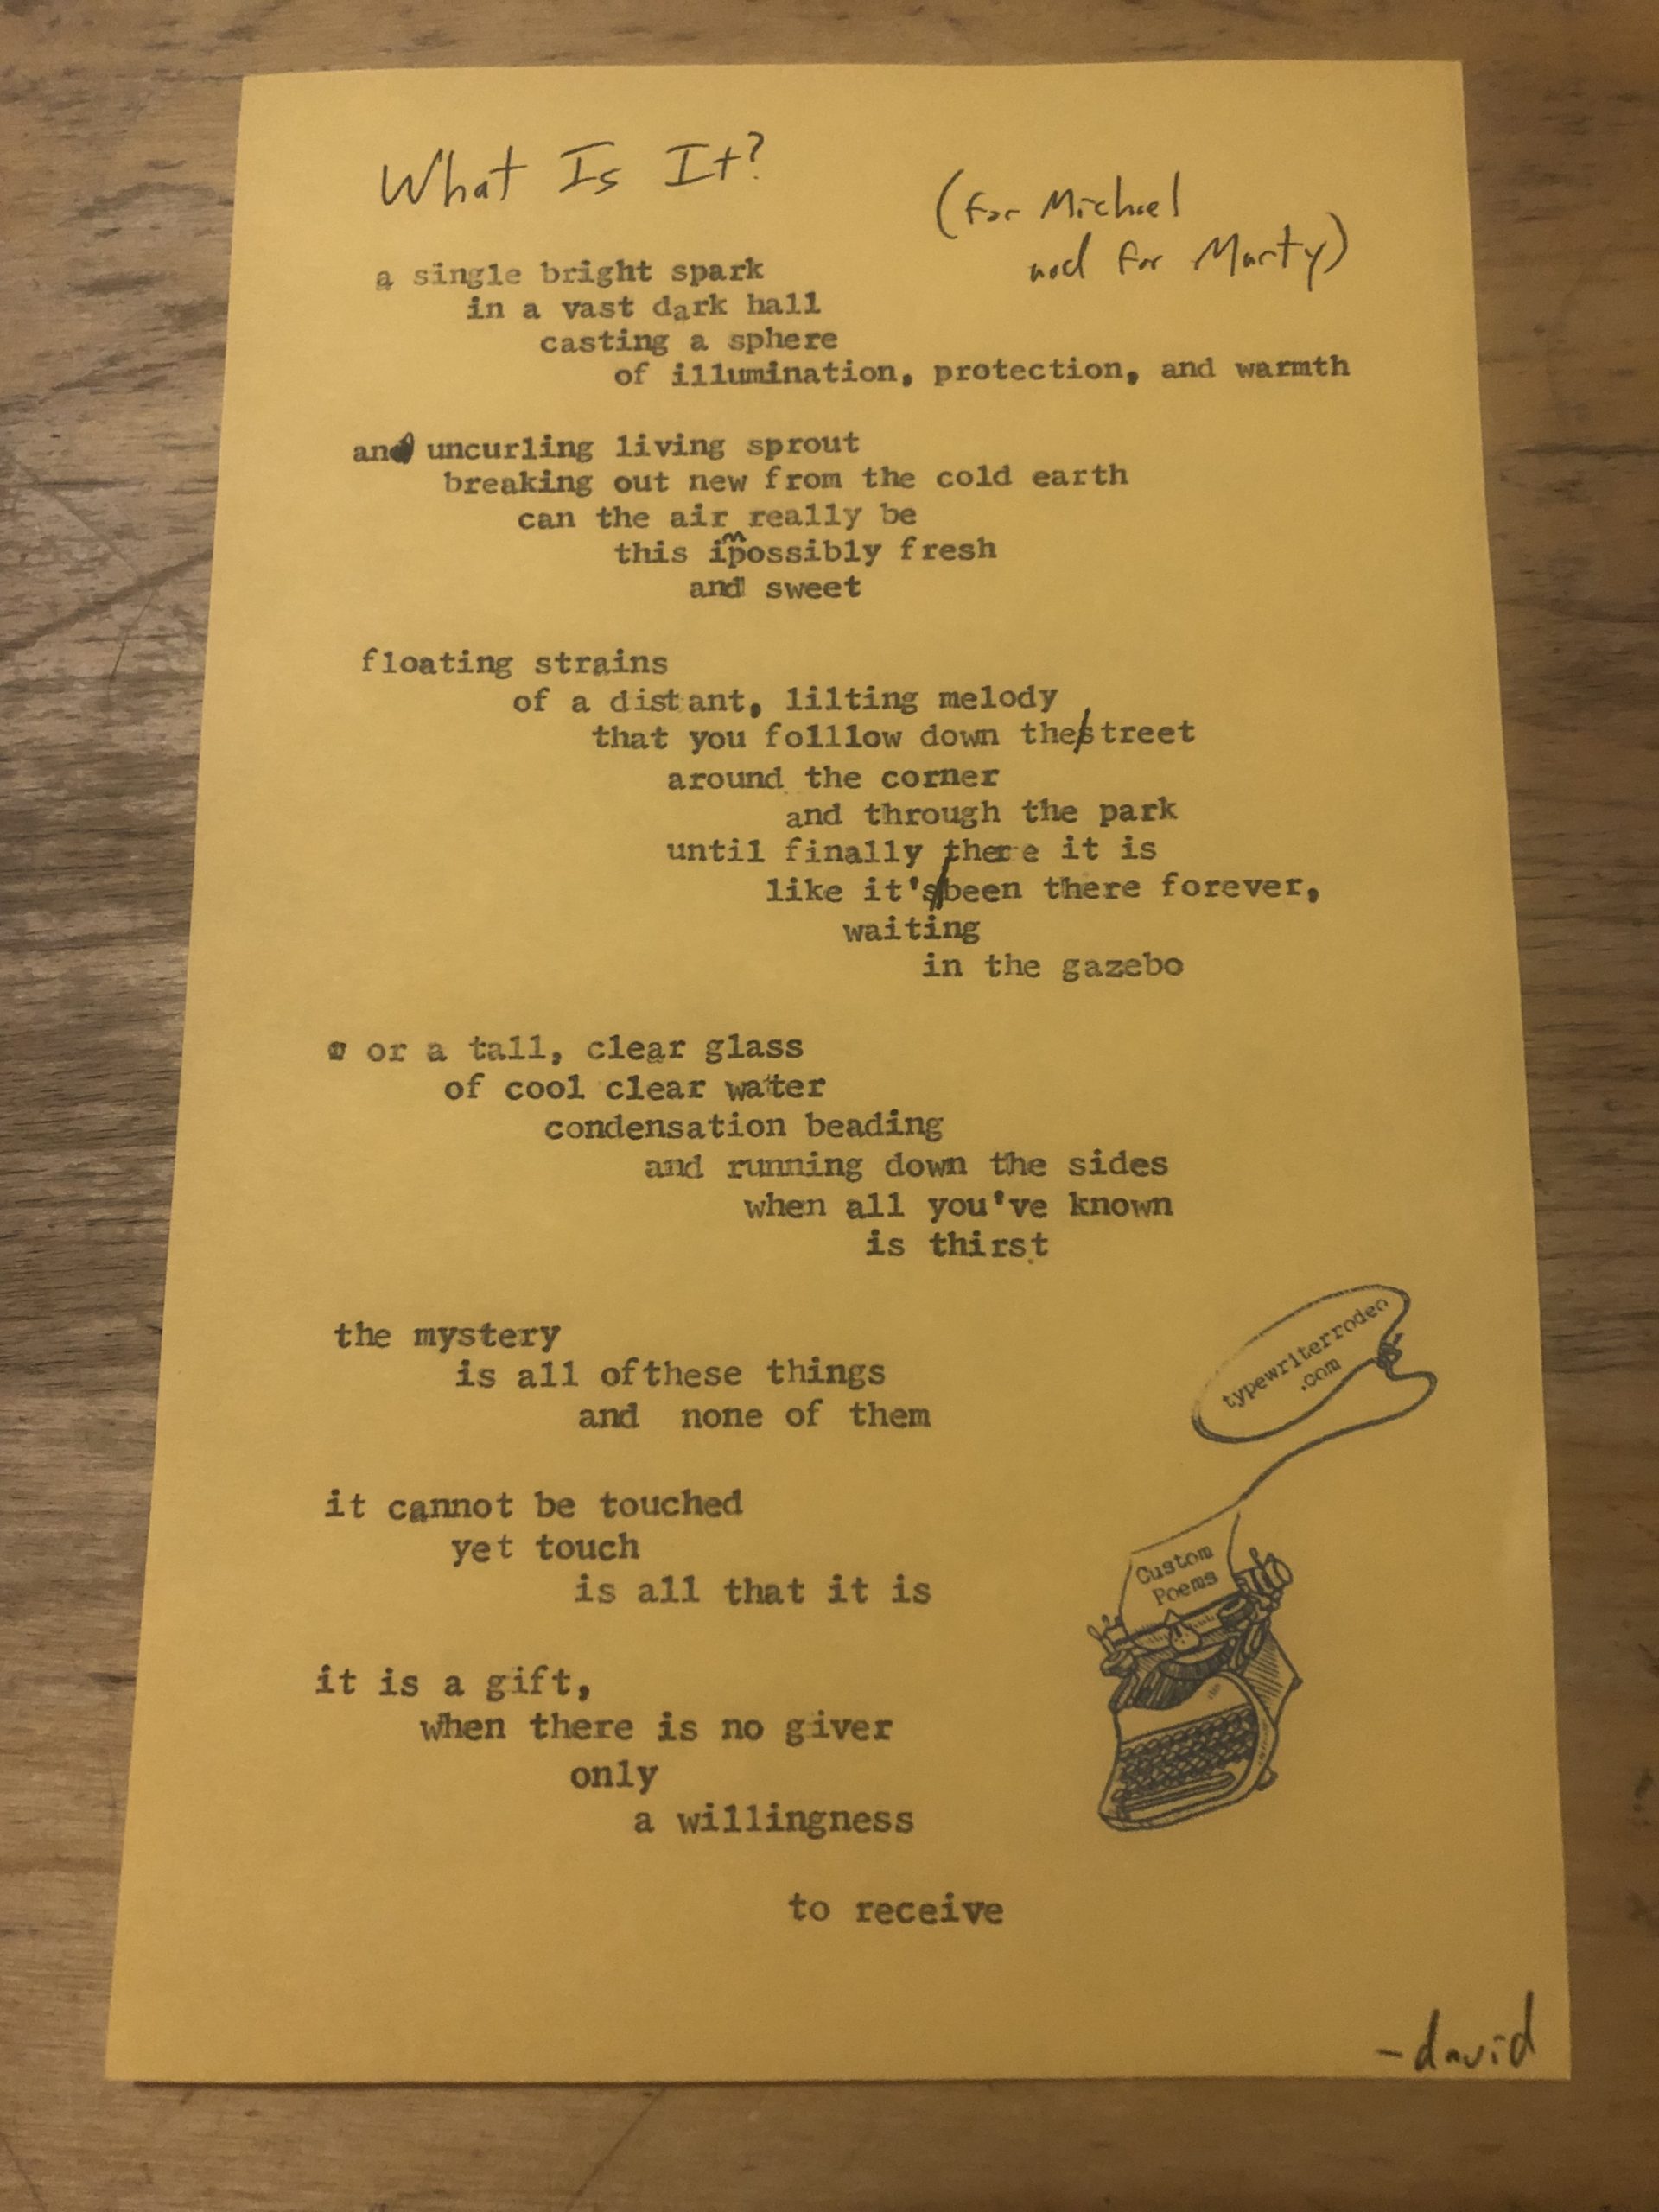 a photo of the typewritten poem